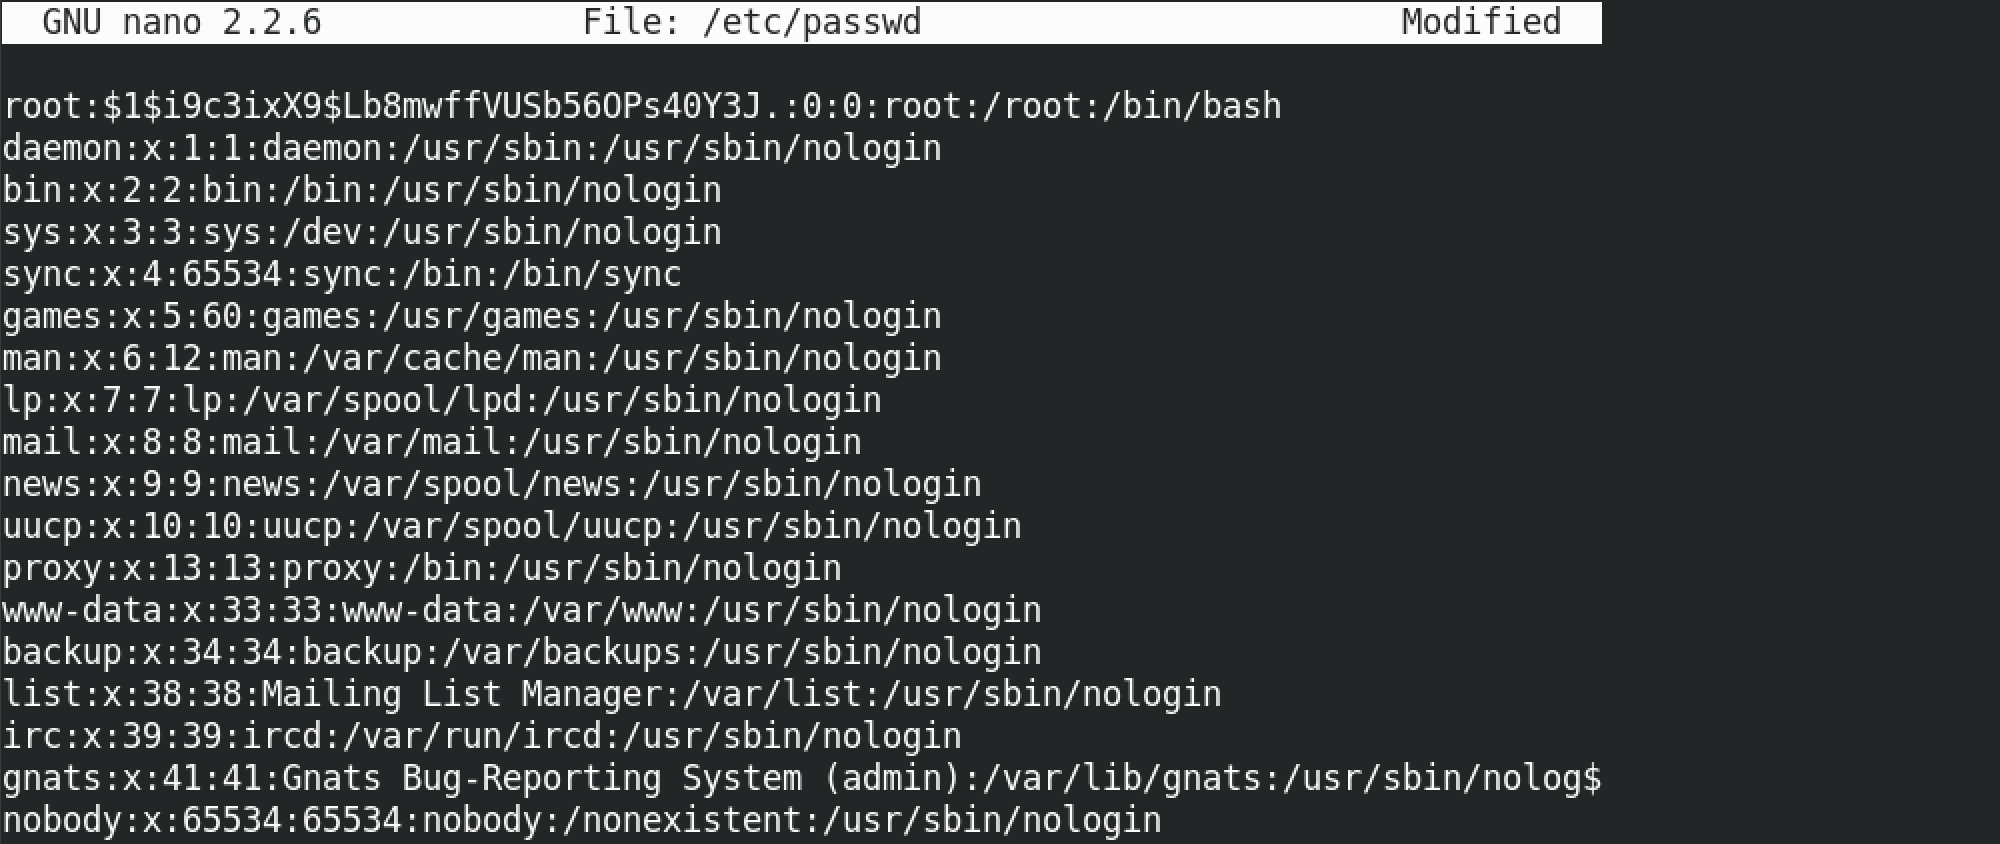 Contents of the /etc/passwd file with the newly added MD5 hash.